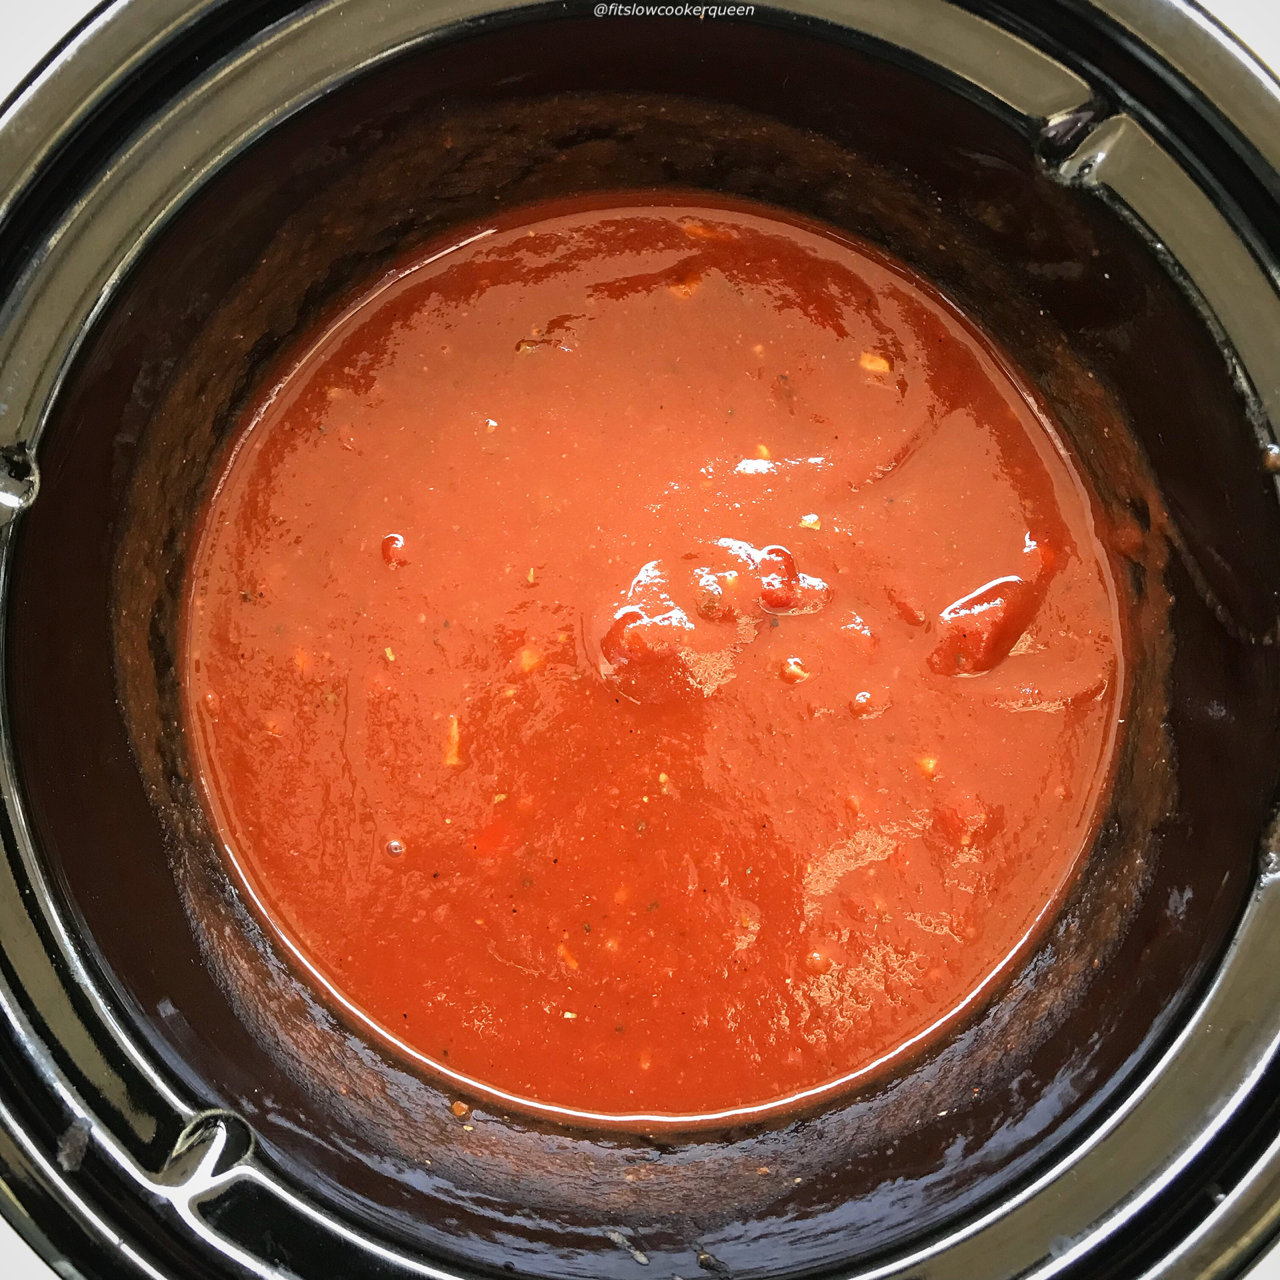 This tangy, homemade slow cooker BBQ sauce is sugar-free, gluten-free, whole30 compliant, and paleo but still packed with flavor.